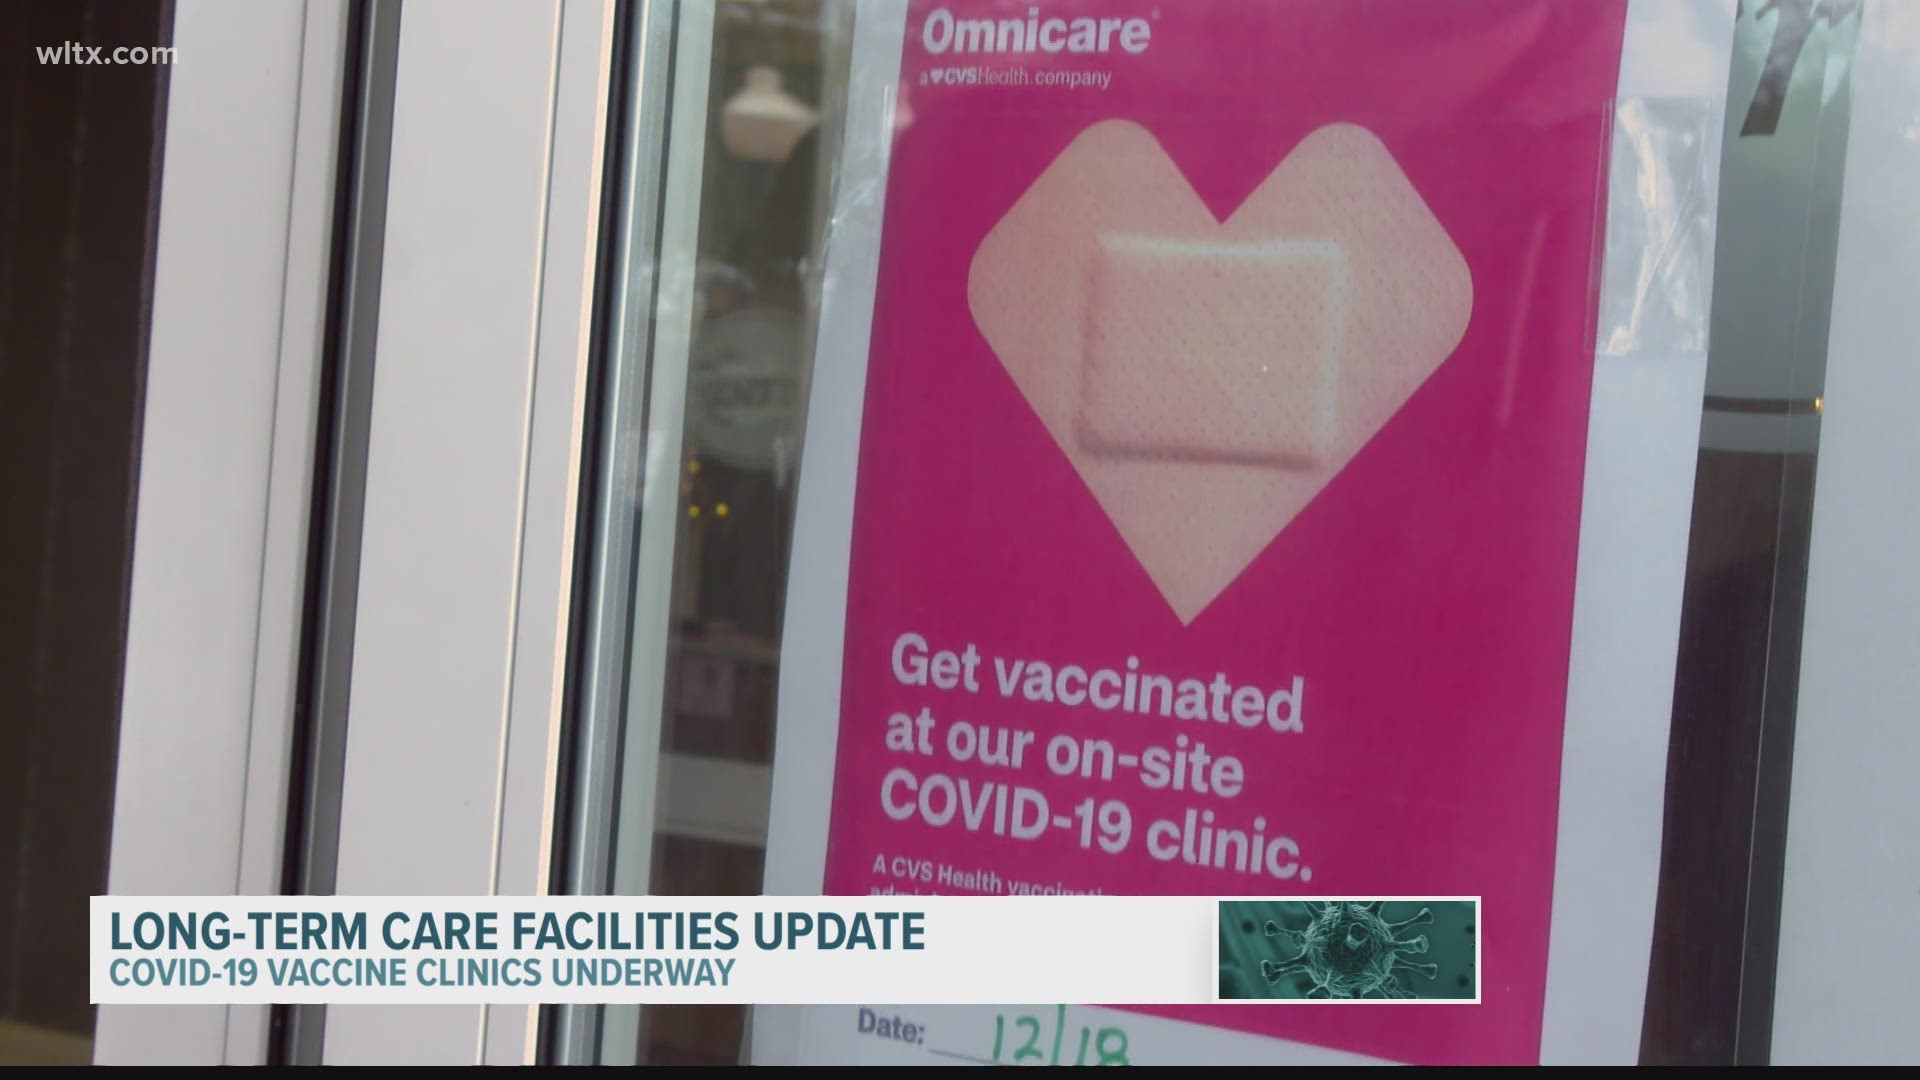 DHEC says all facilities will have had their first vaccine clinic by the end of January.